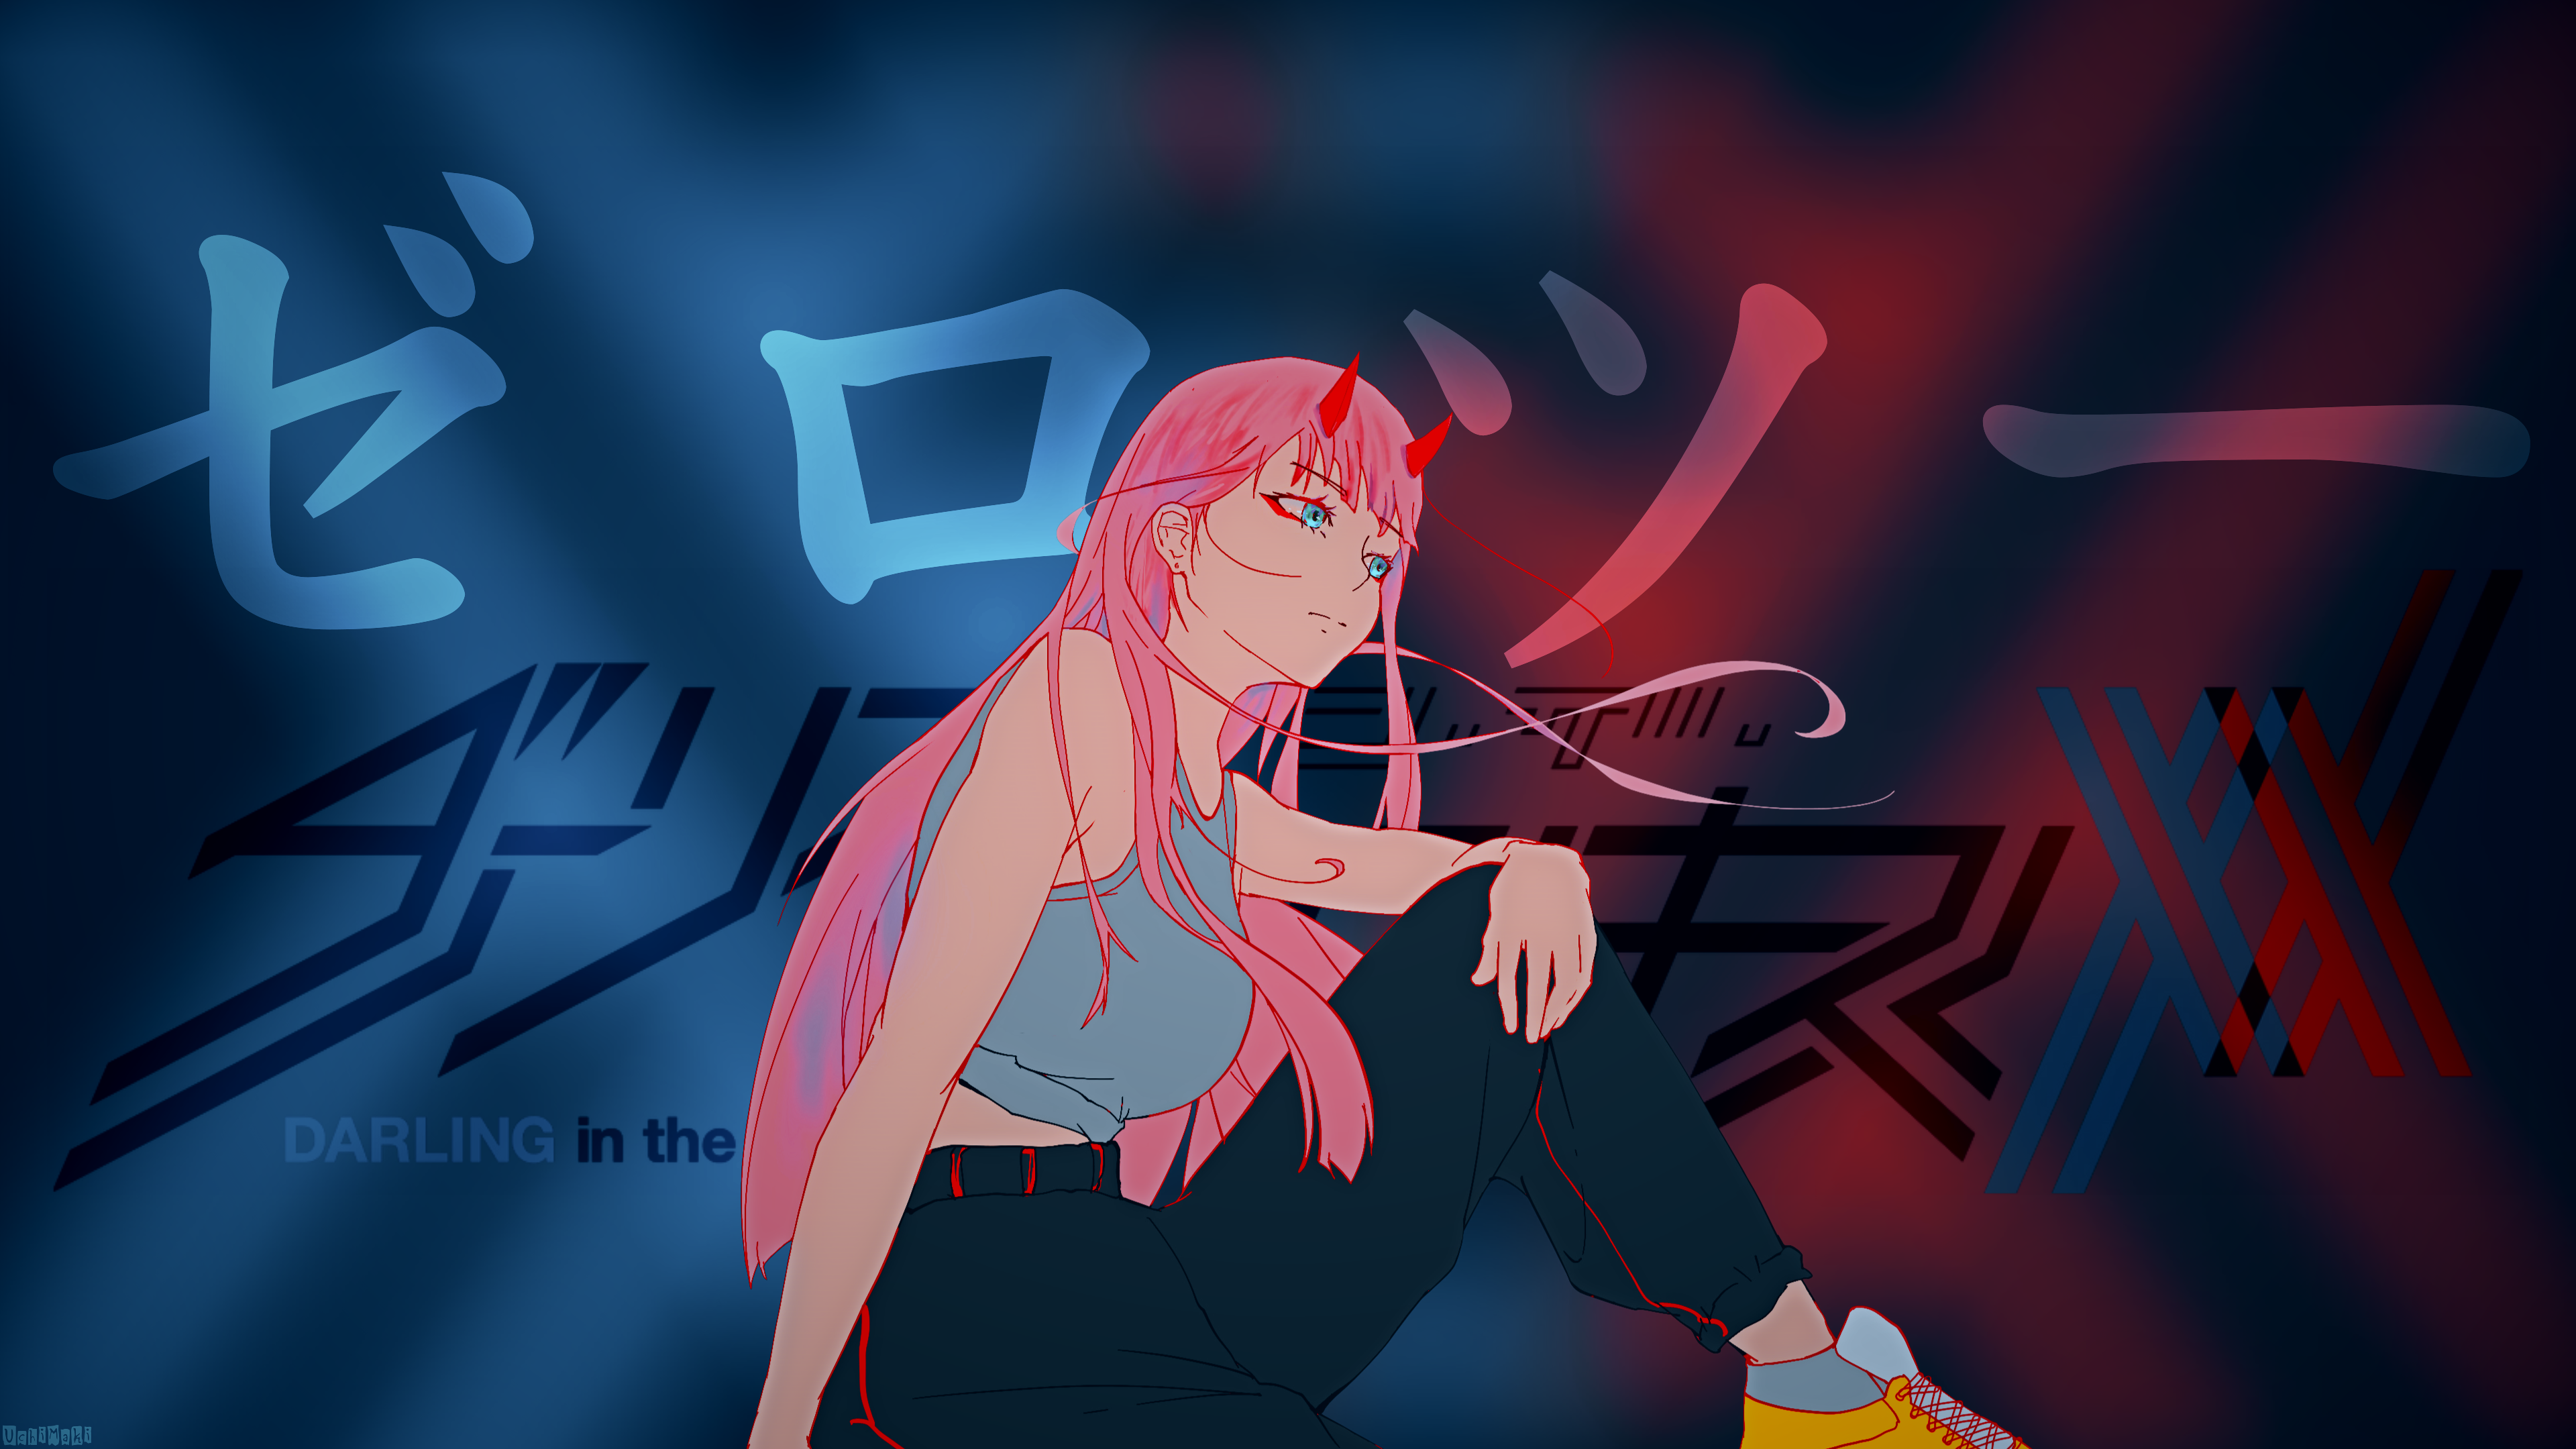 Anime 3840x2160 Darling in the FranXX Zero Two (Darling in the FranXX) pink hair blurry background dark background fan art 4K xx:me anime girls jogging Japanese minimalism horns long hair sporty artwork black background 2D text white text neon text overlay high detail